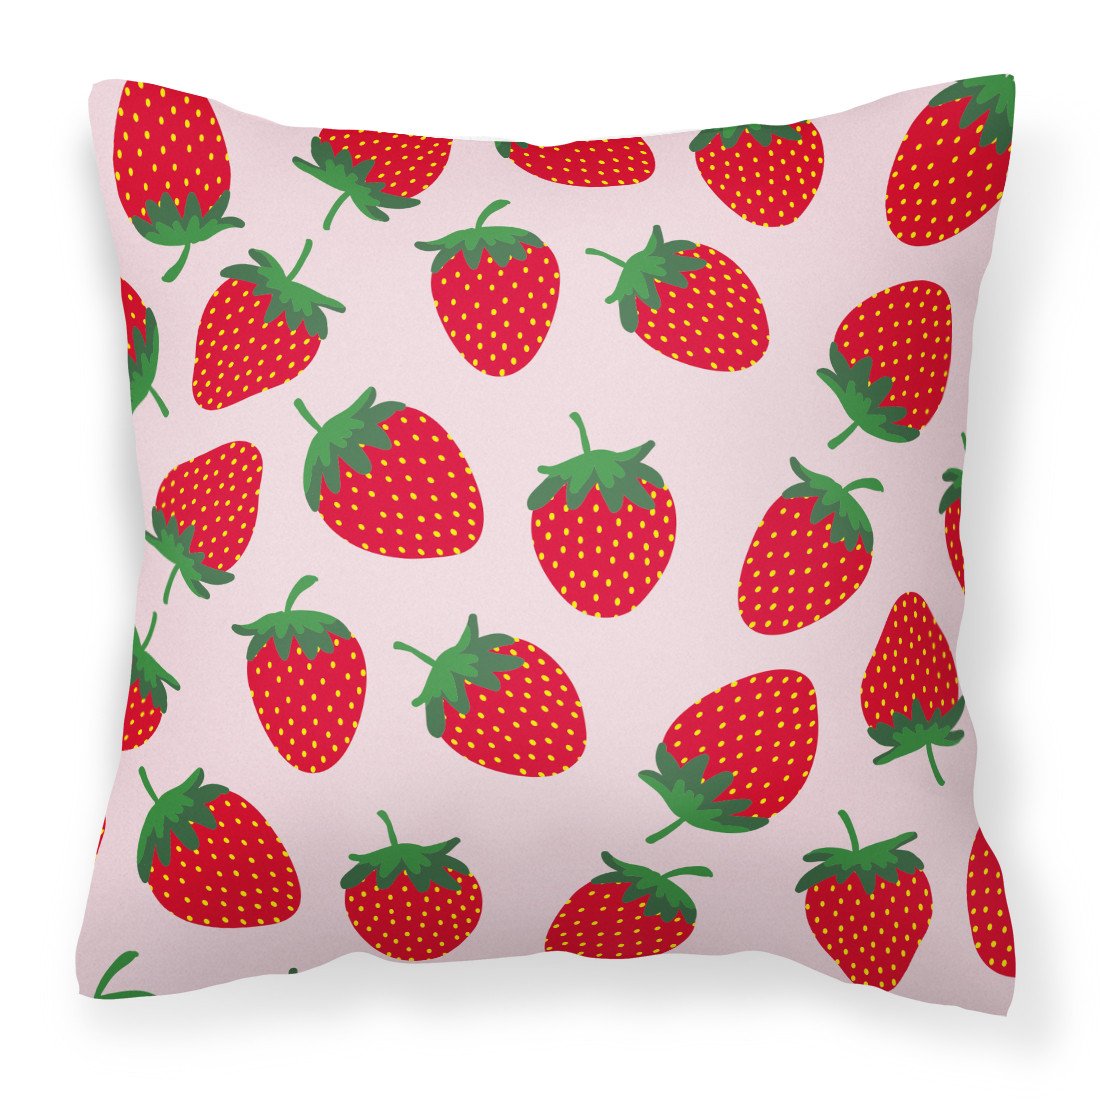 Strawberries on Pink Fabric Decorative Pillow BB5146PW1818 by Caroline's Treasures